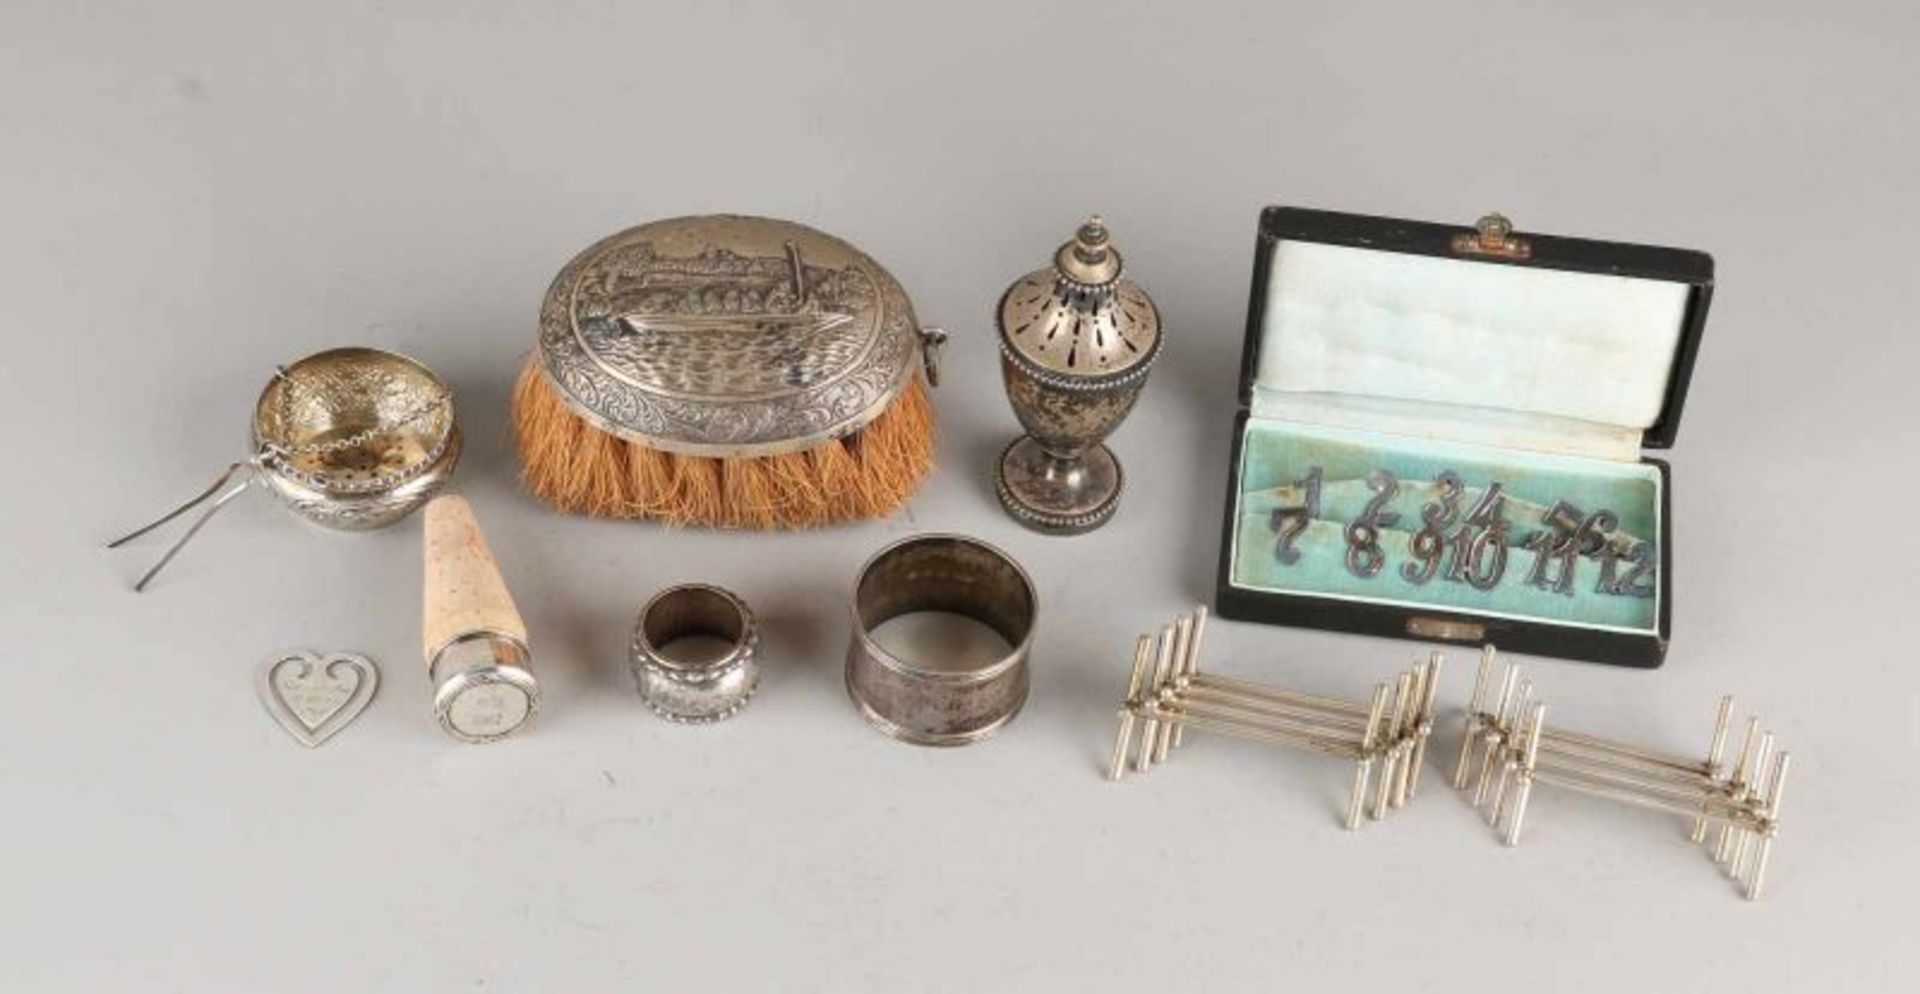 Lot silverware table with brush depicting a spreader on a roll, napkin ring and two small napkin